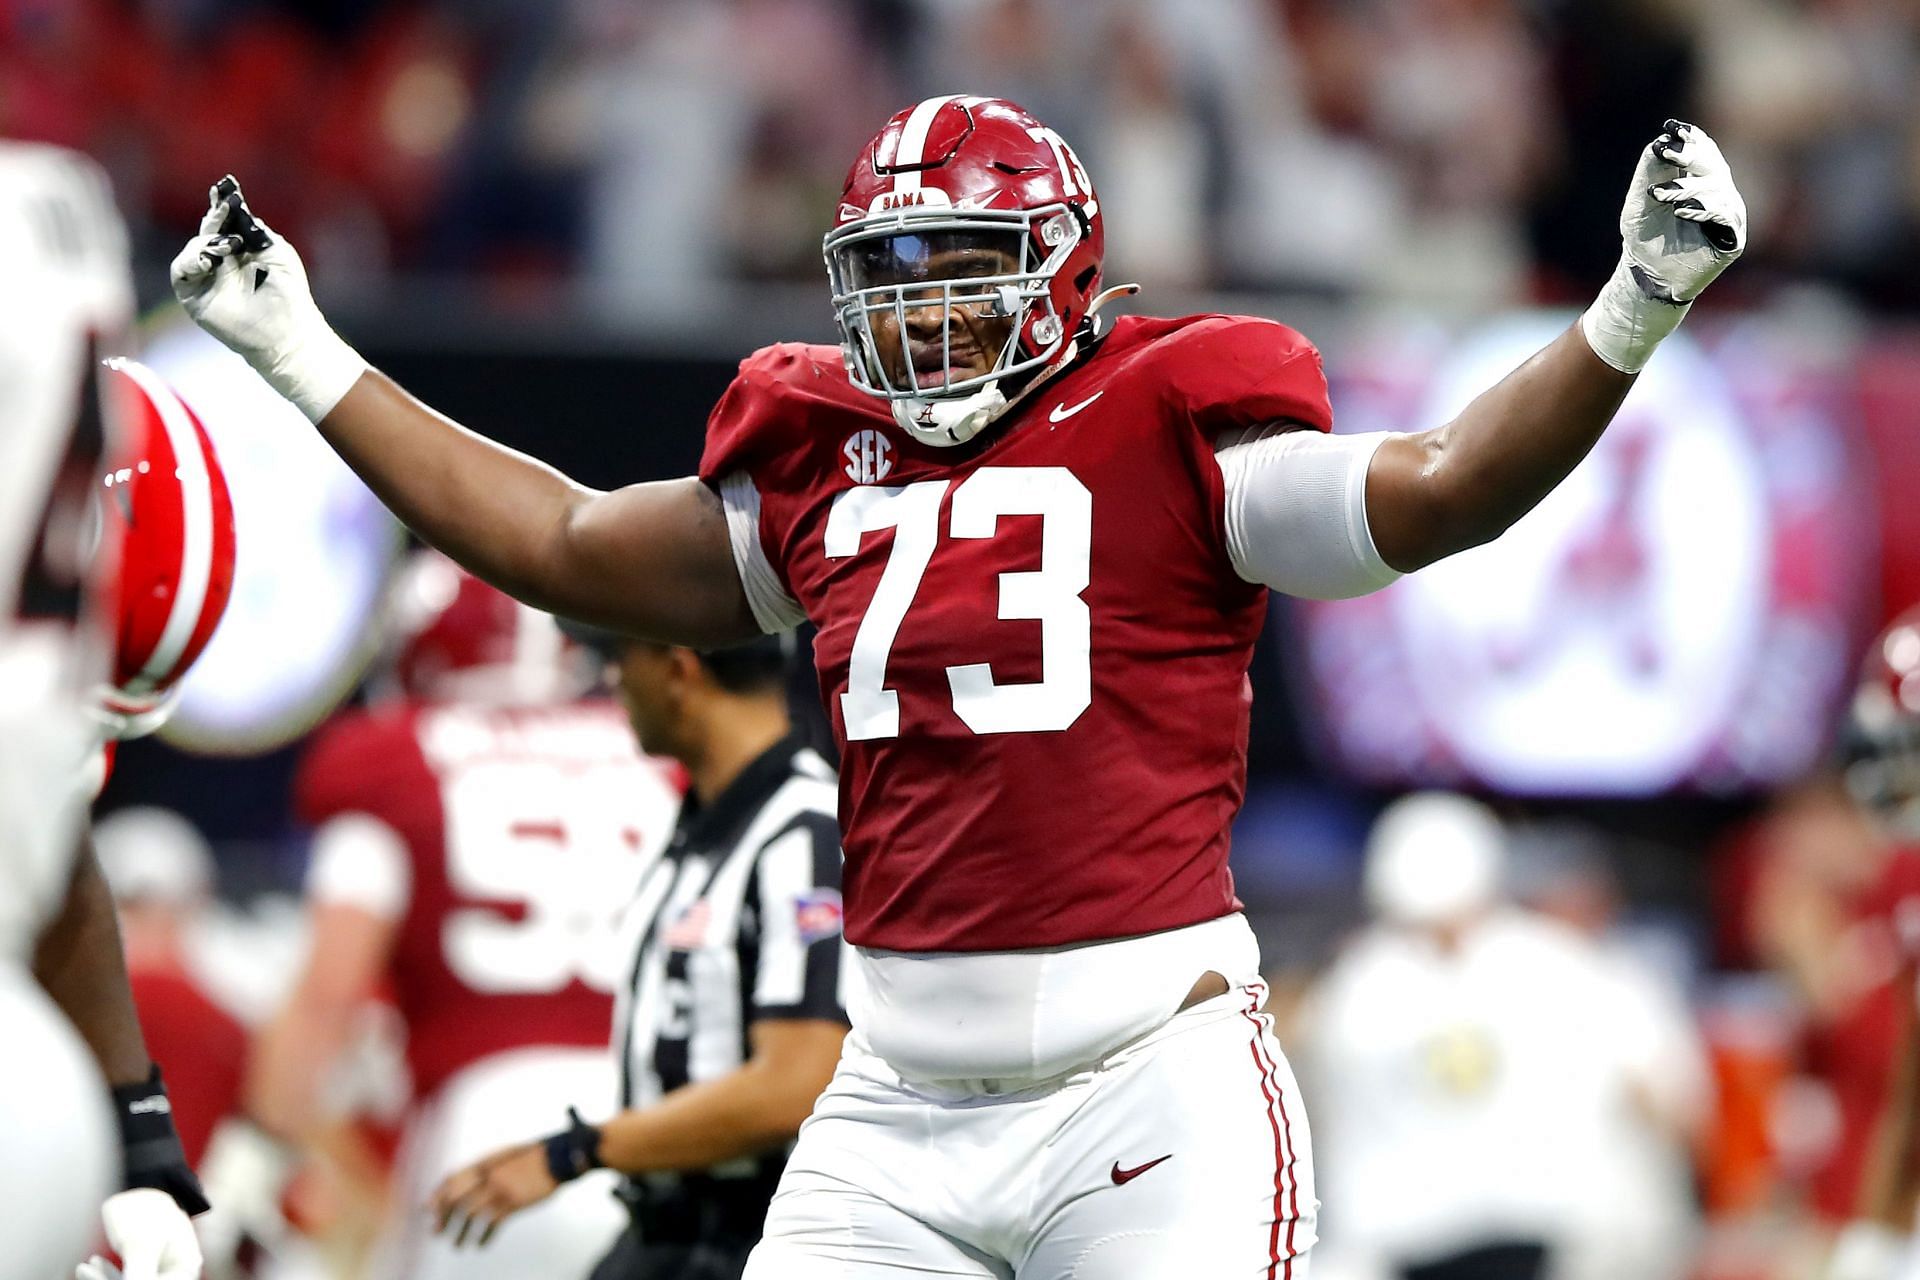 3 Alabama players who could potentially be drafted in the first round